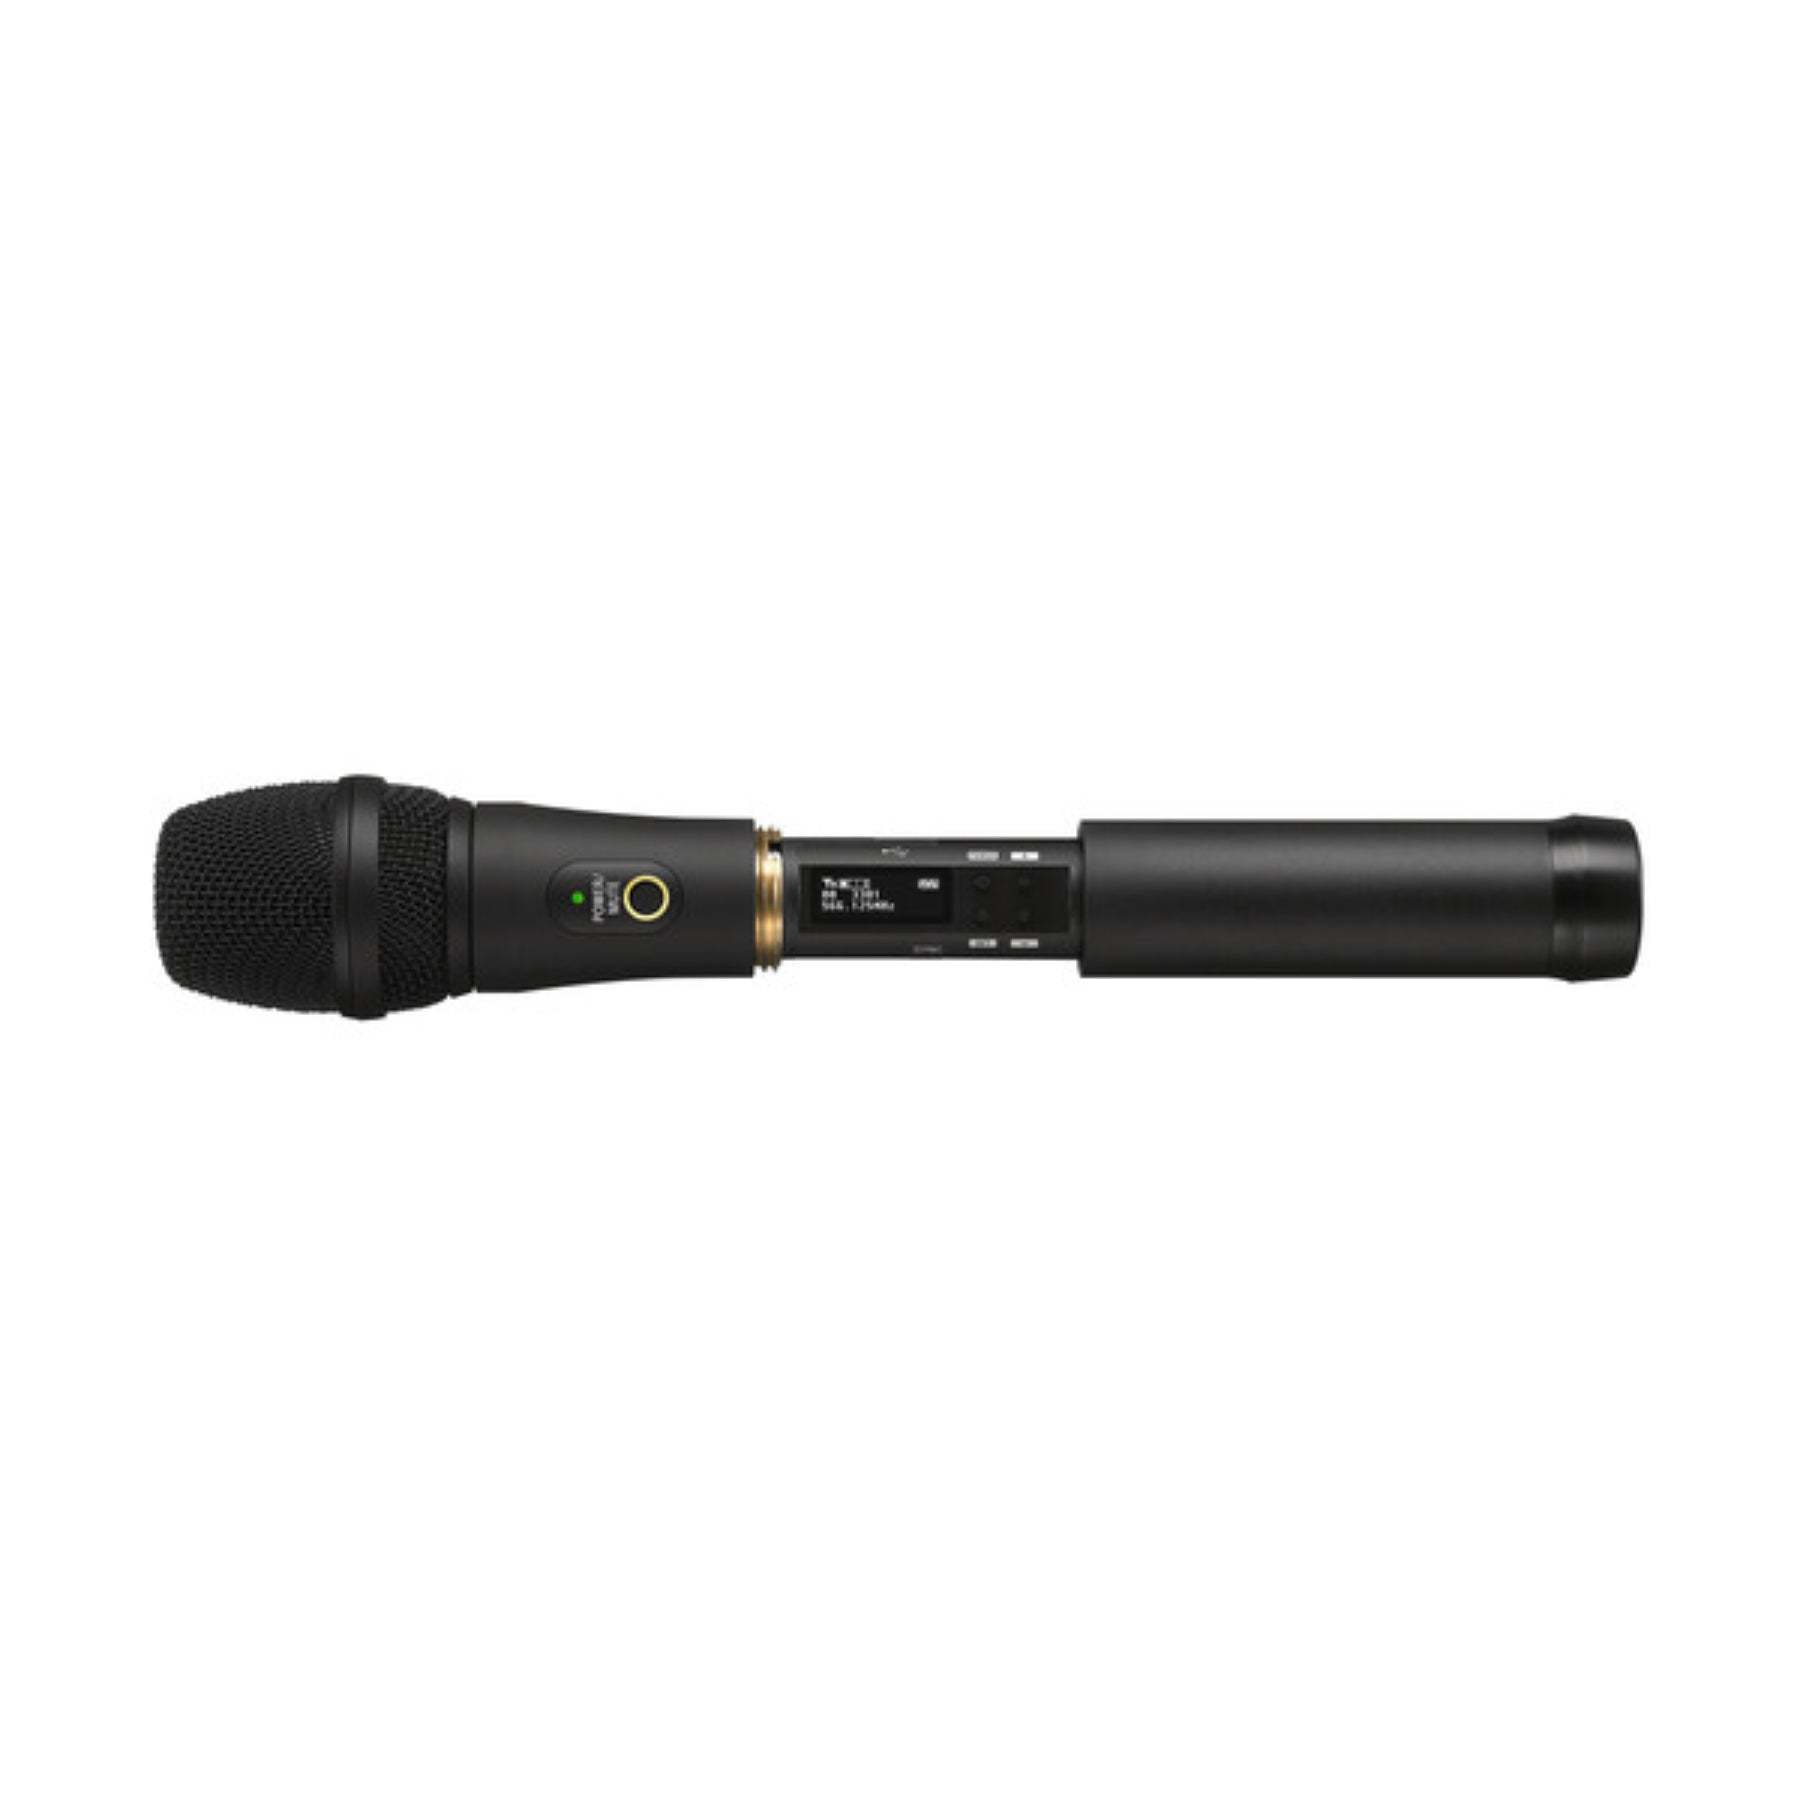 Sony UHF handheld wireless microphone for hire